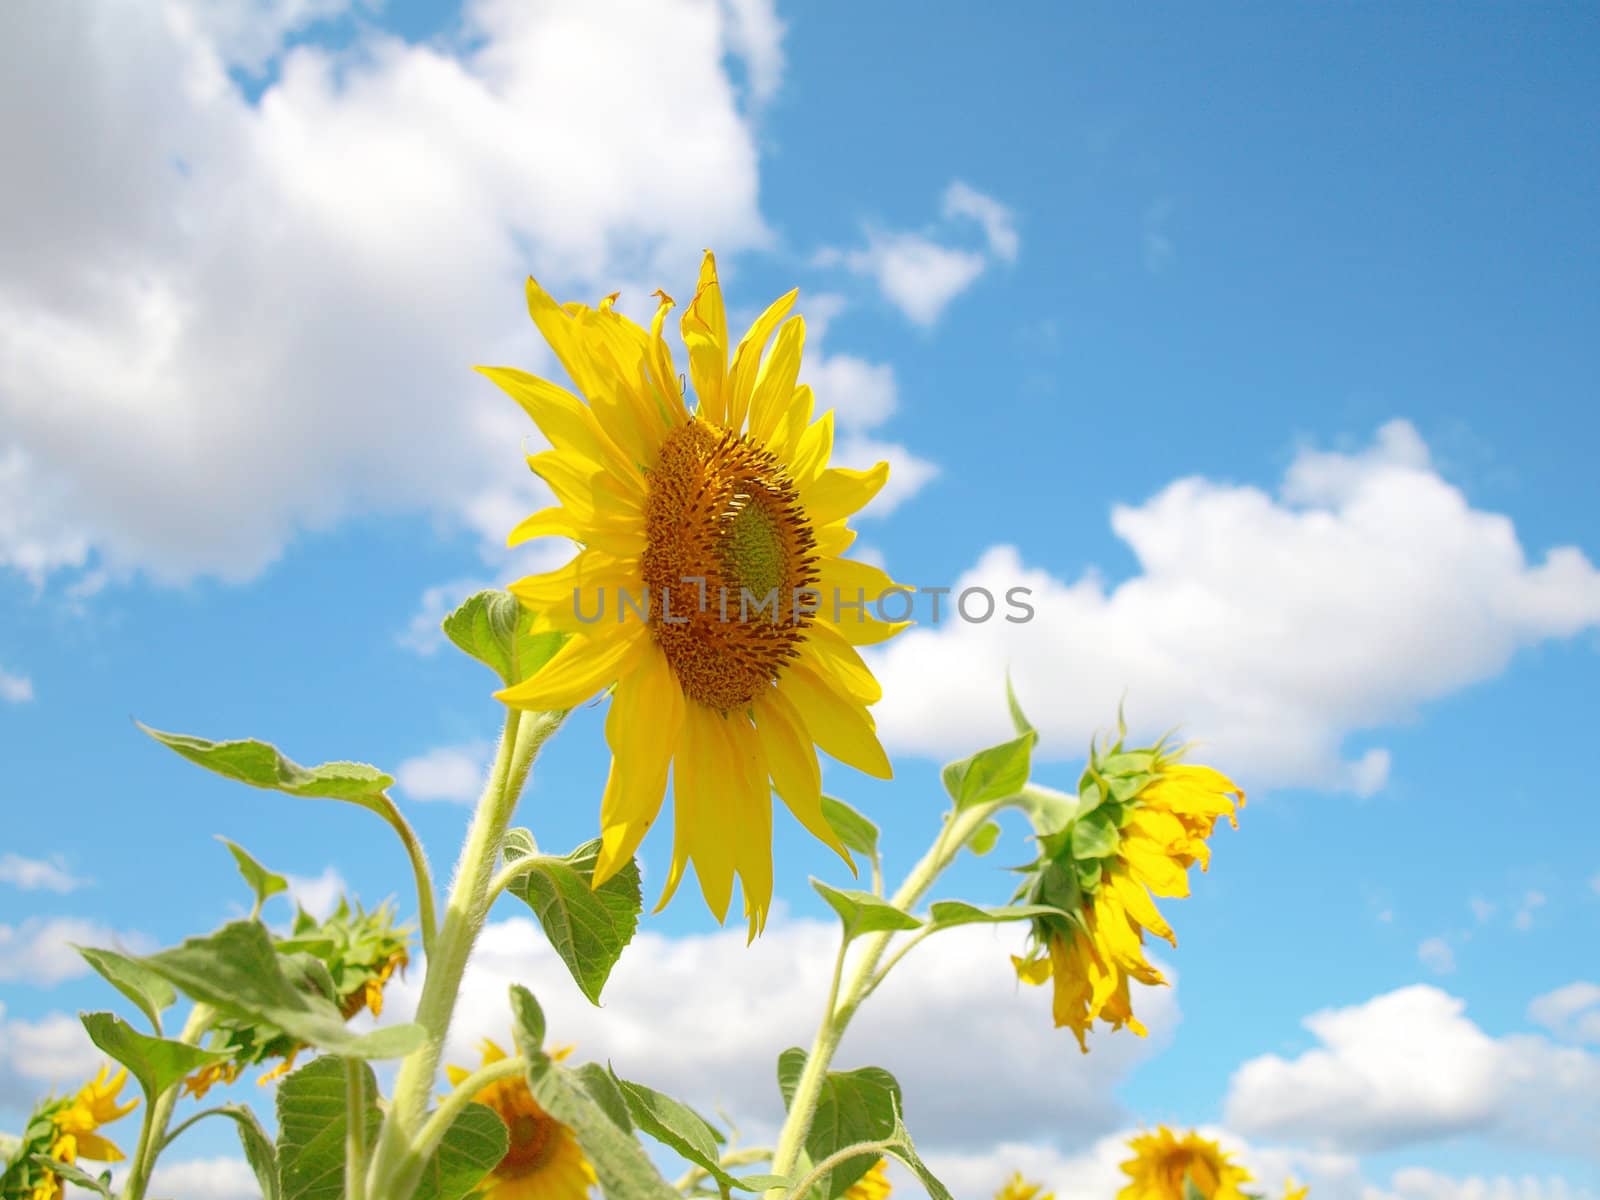 Sunflowers over blue sky with clouds. Shallow DOF.